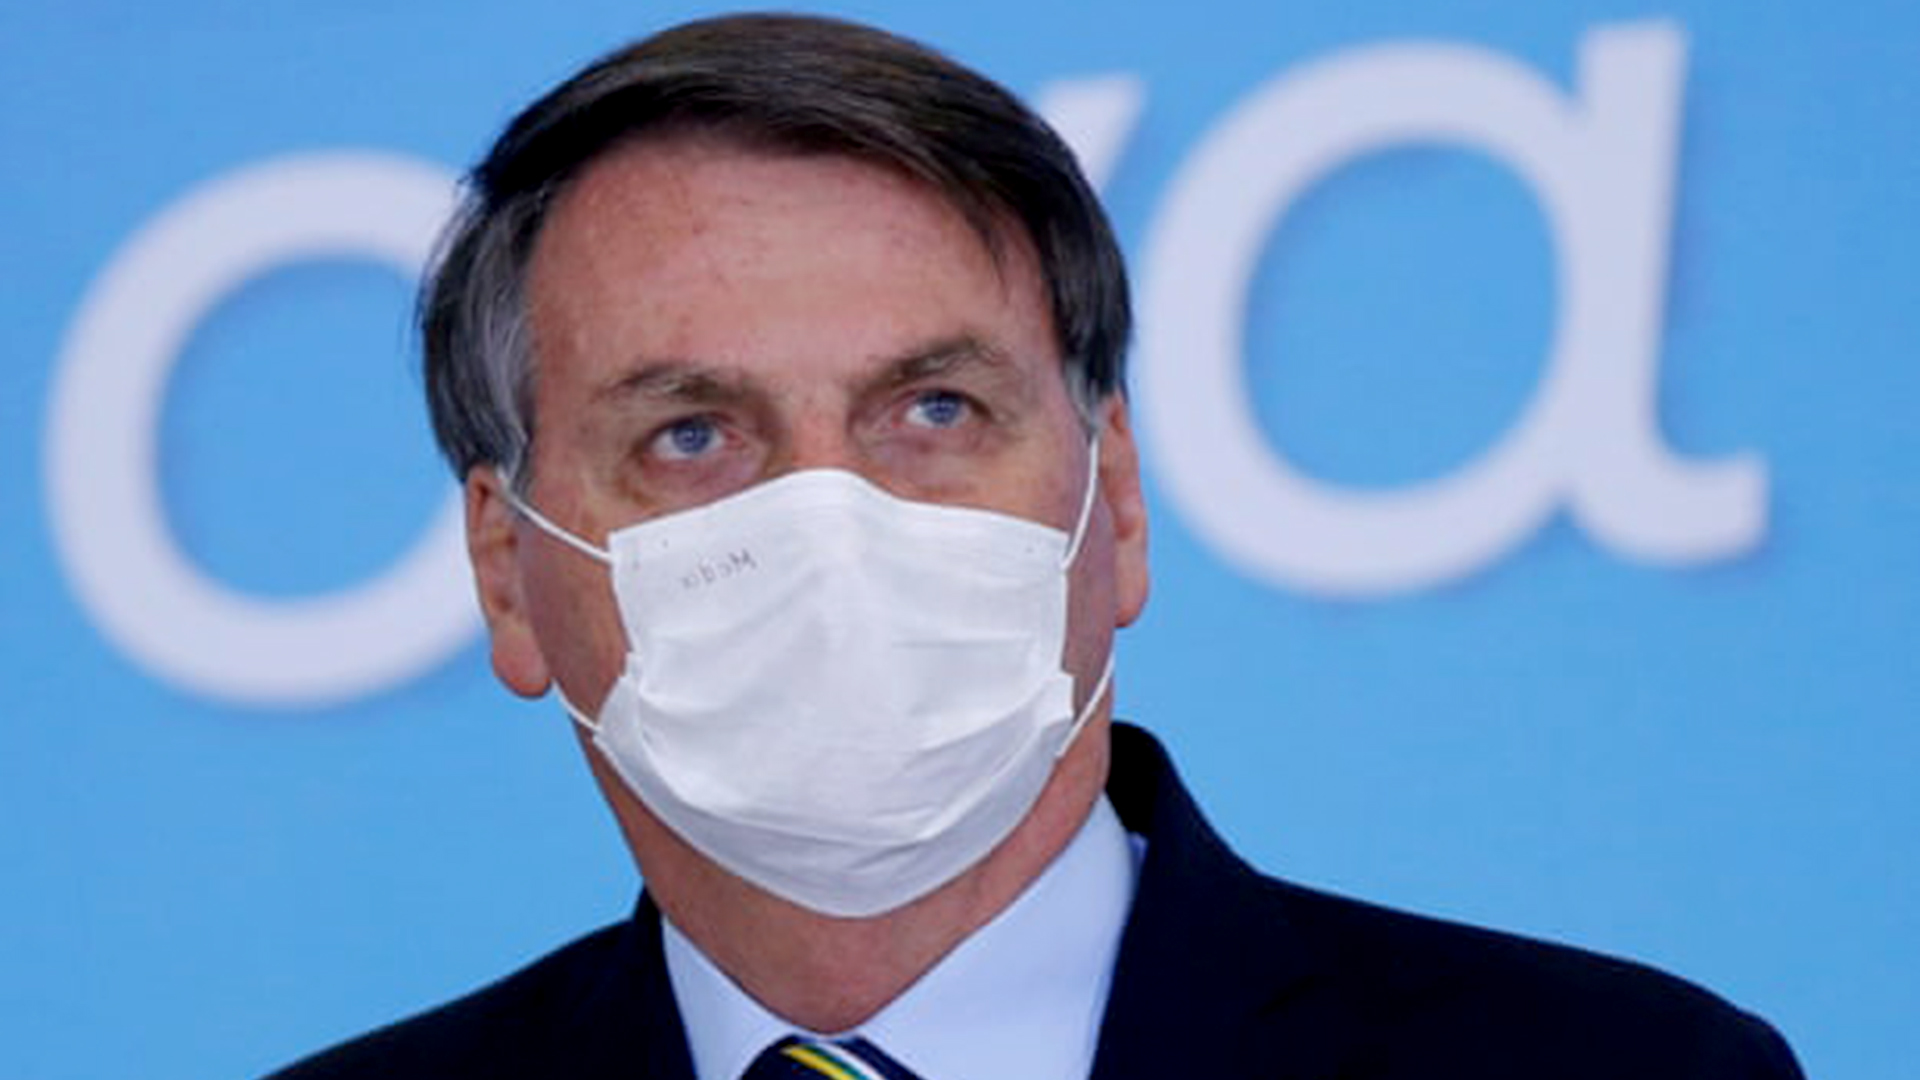 Brazilian President, who repeatedly downplayed the dangers of Covid-19, tested positive